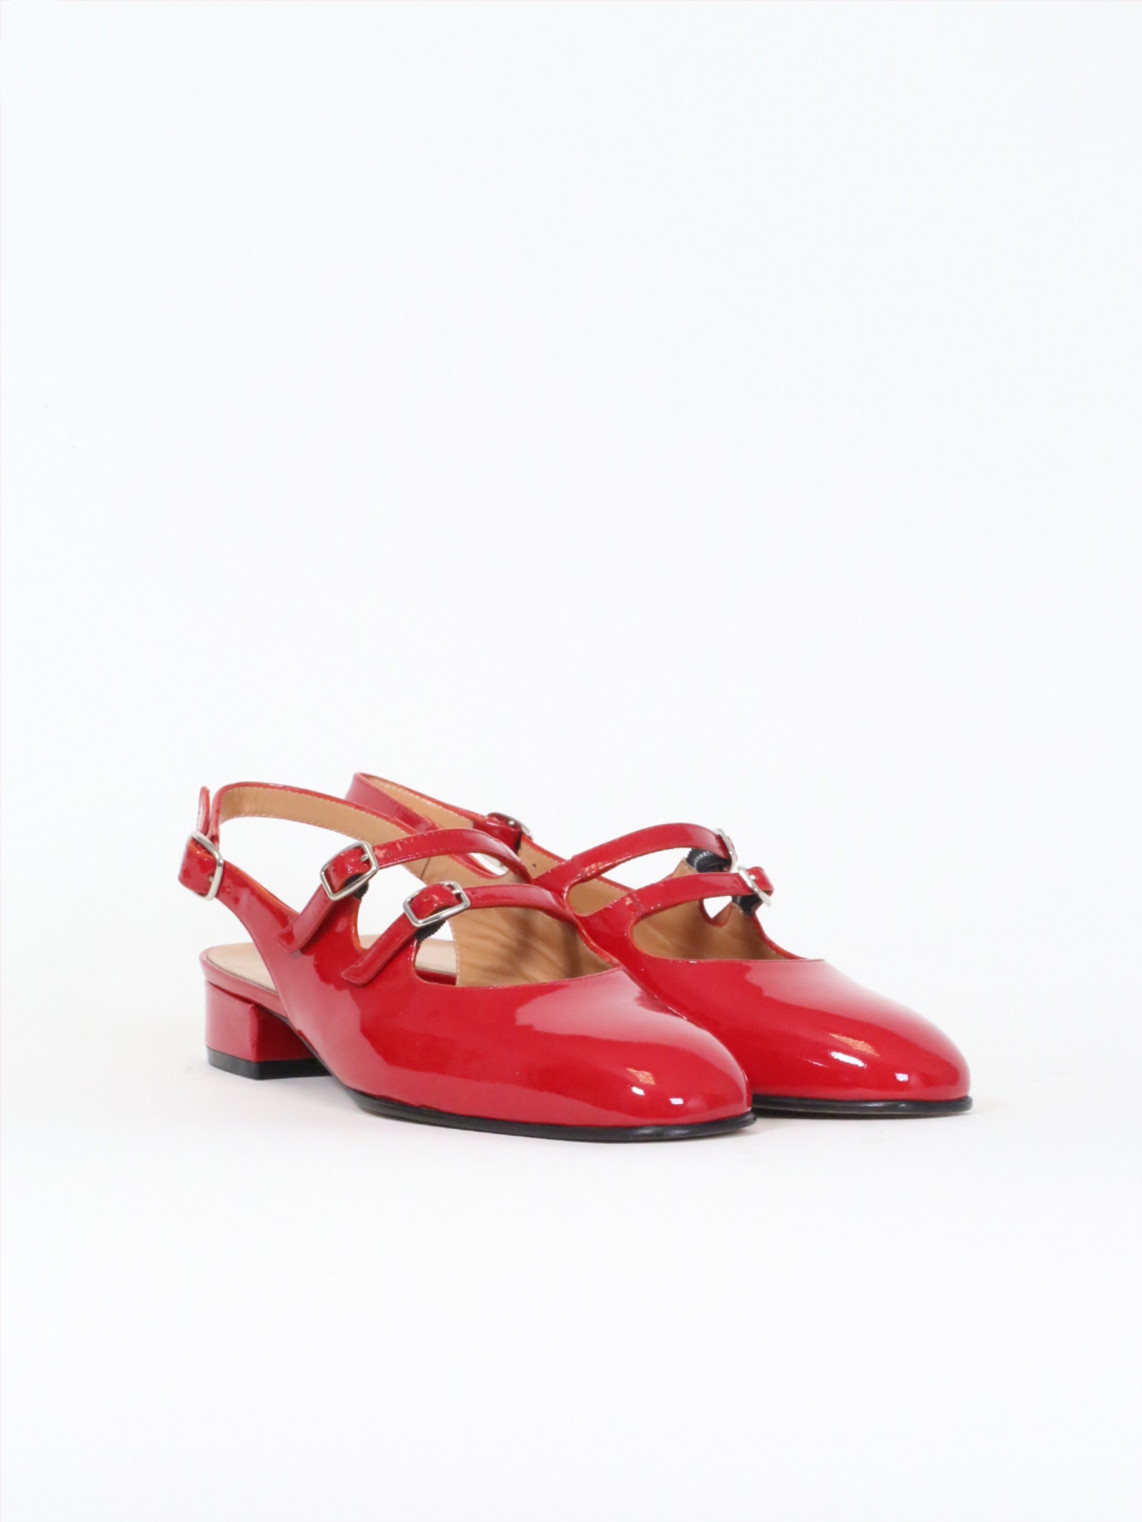 PECHE red patent leather mary janes Carel Paris Shoes